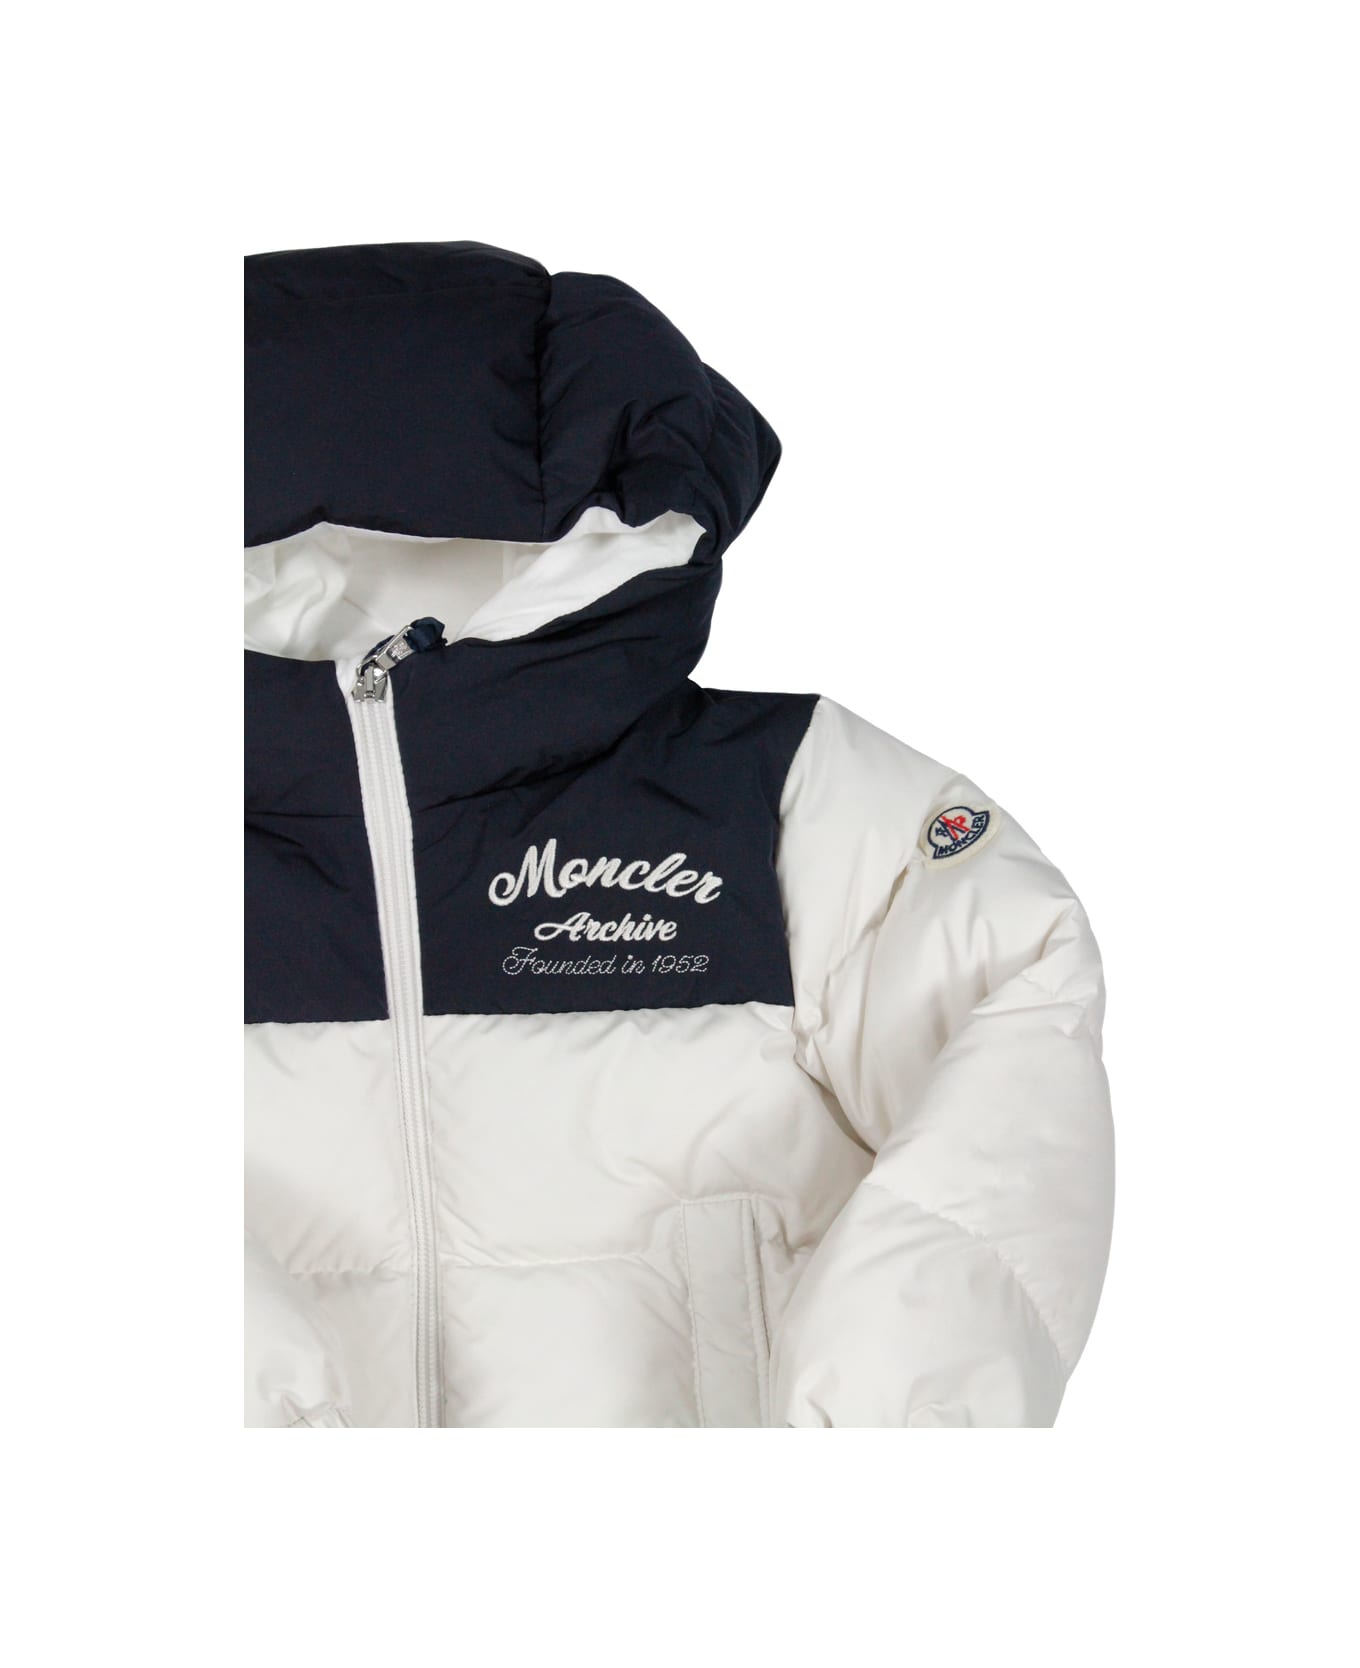 Moncler Joe Down Jacket Padded In Real Two-tone White And Blue Goose Down With Hood And Zip Closure Welt Pockets On The Front - White